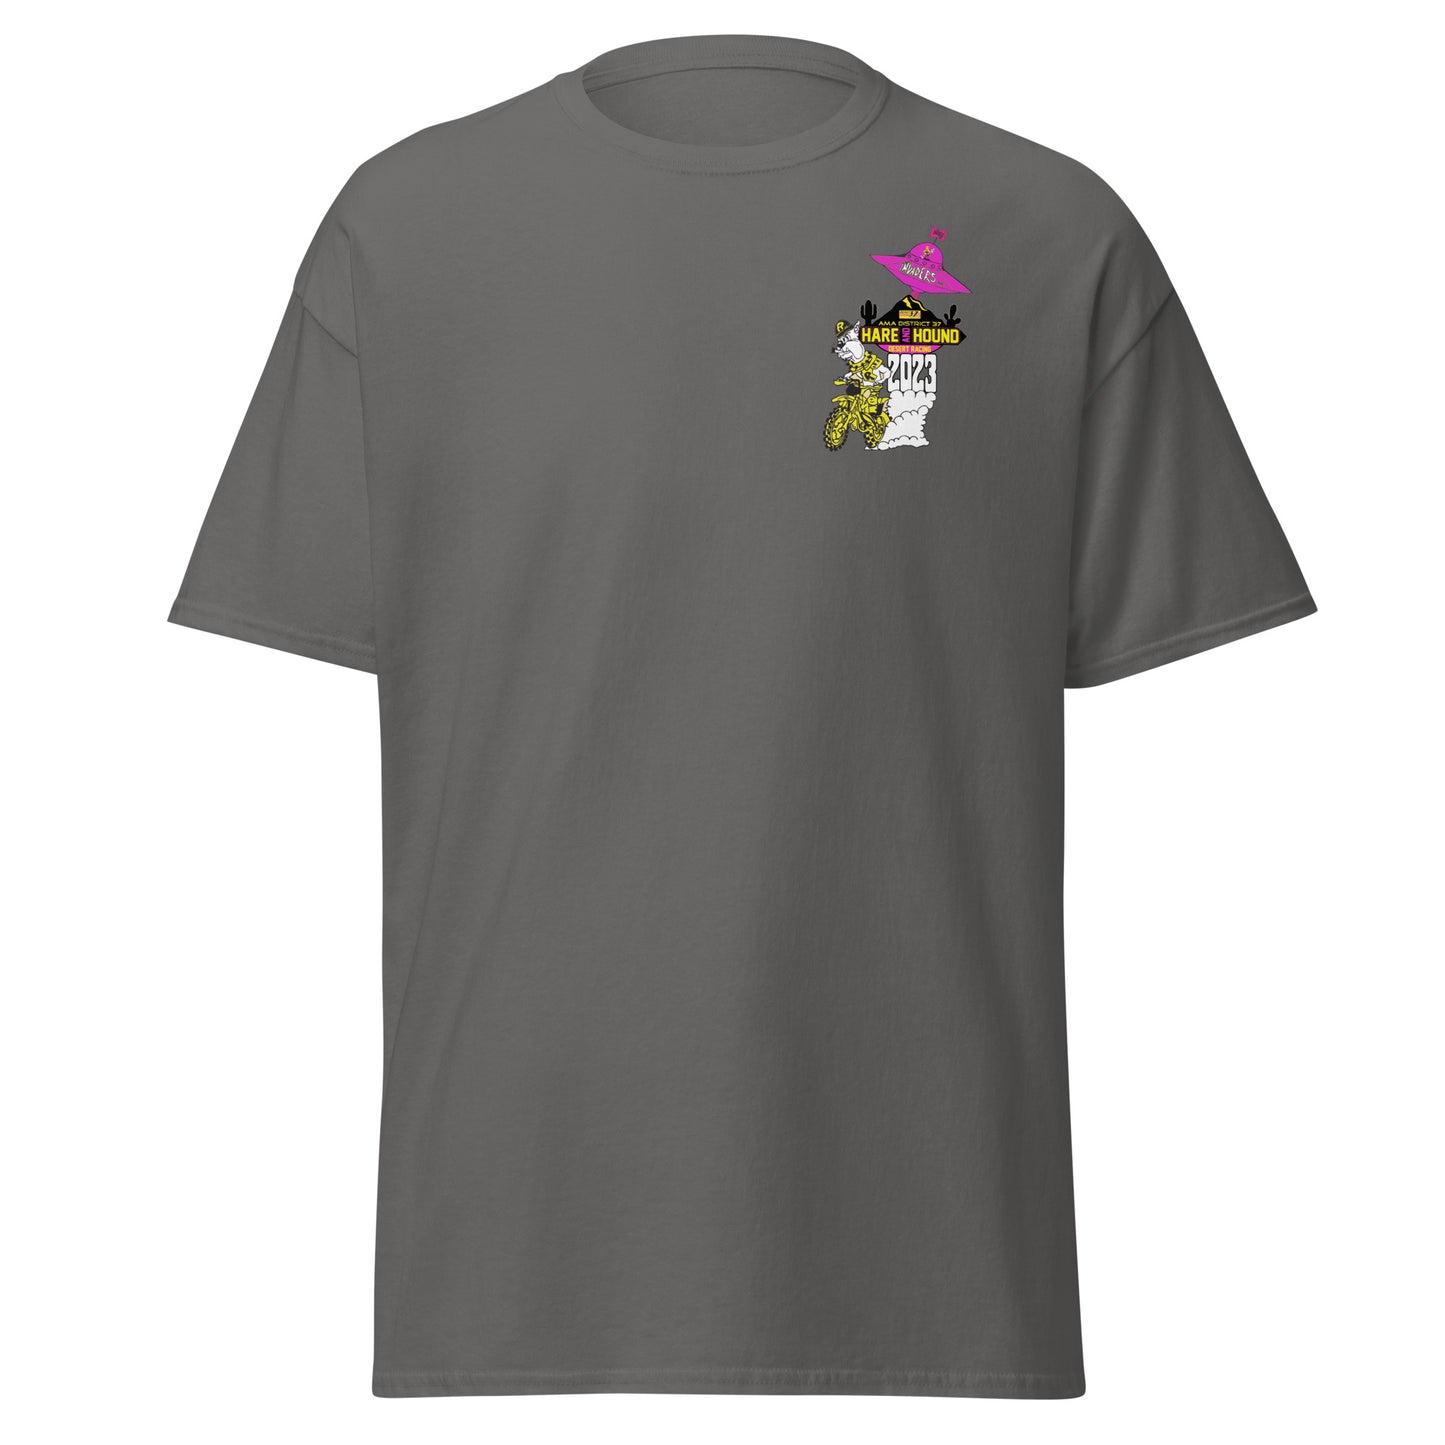 Rovers / Invaders 2023 Hare & Hound Men's T-Shirt